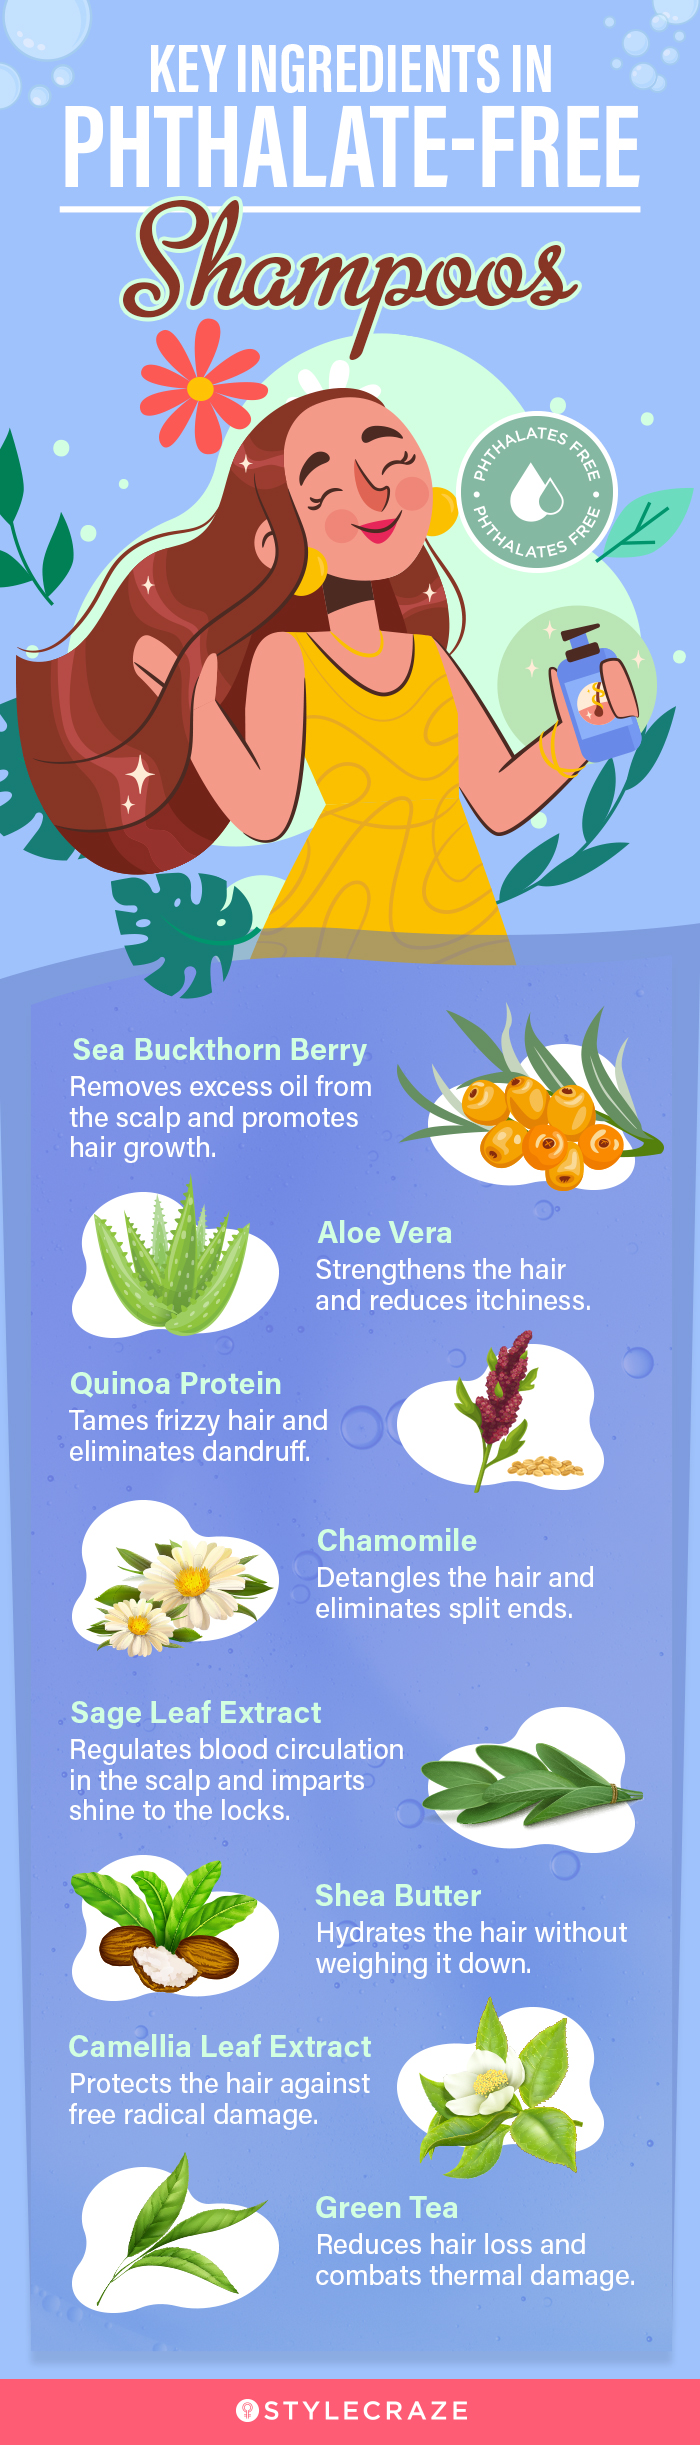 Key Ingredients In Phthalate-Free Shampoos (infographic)